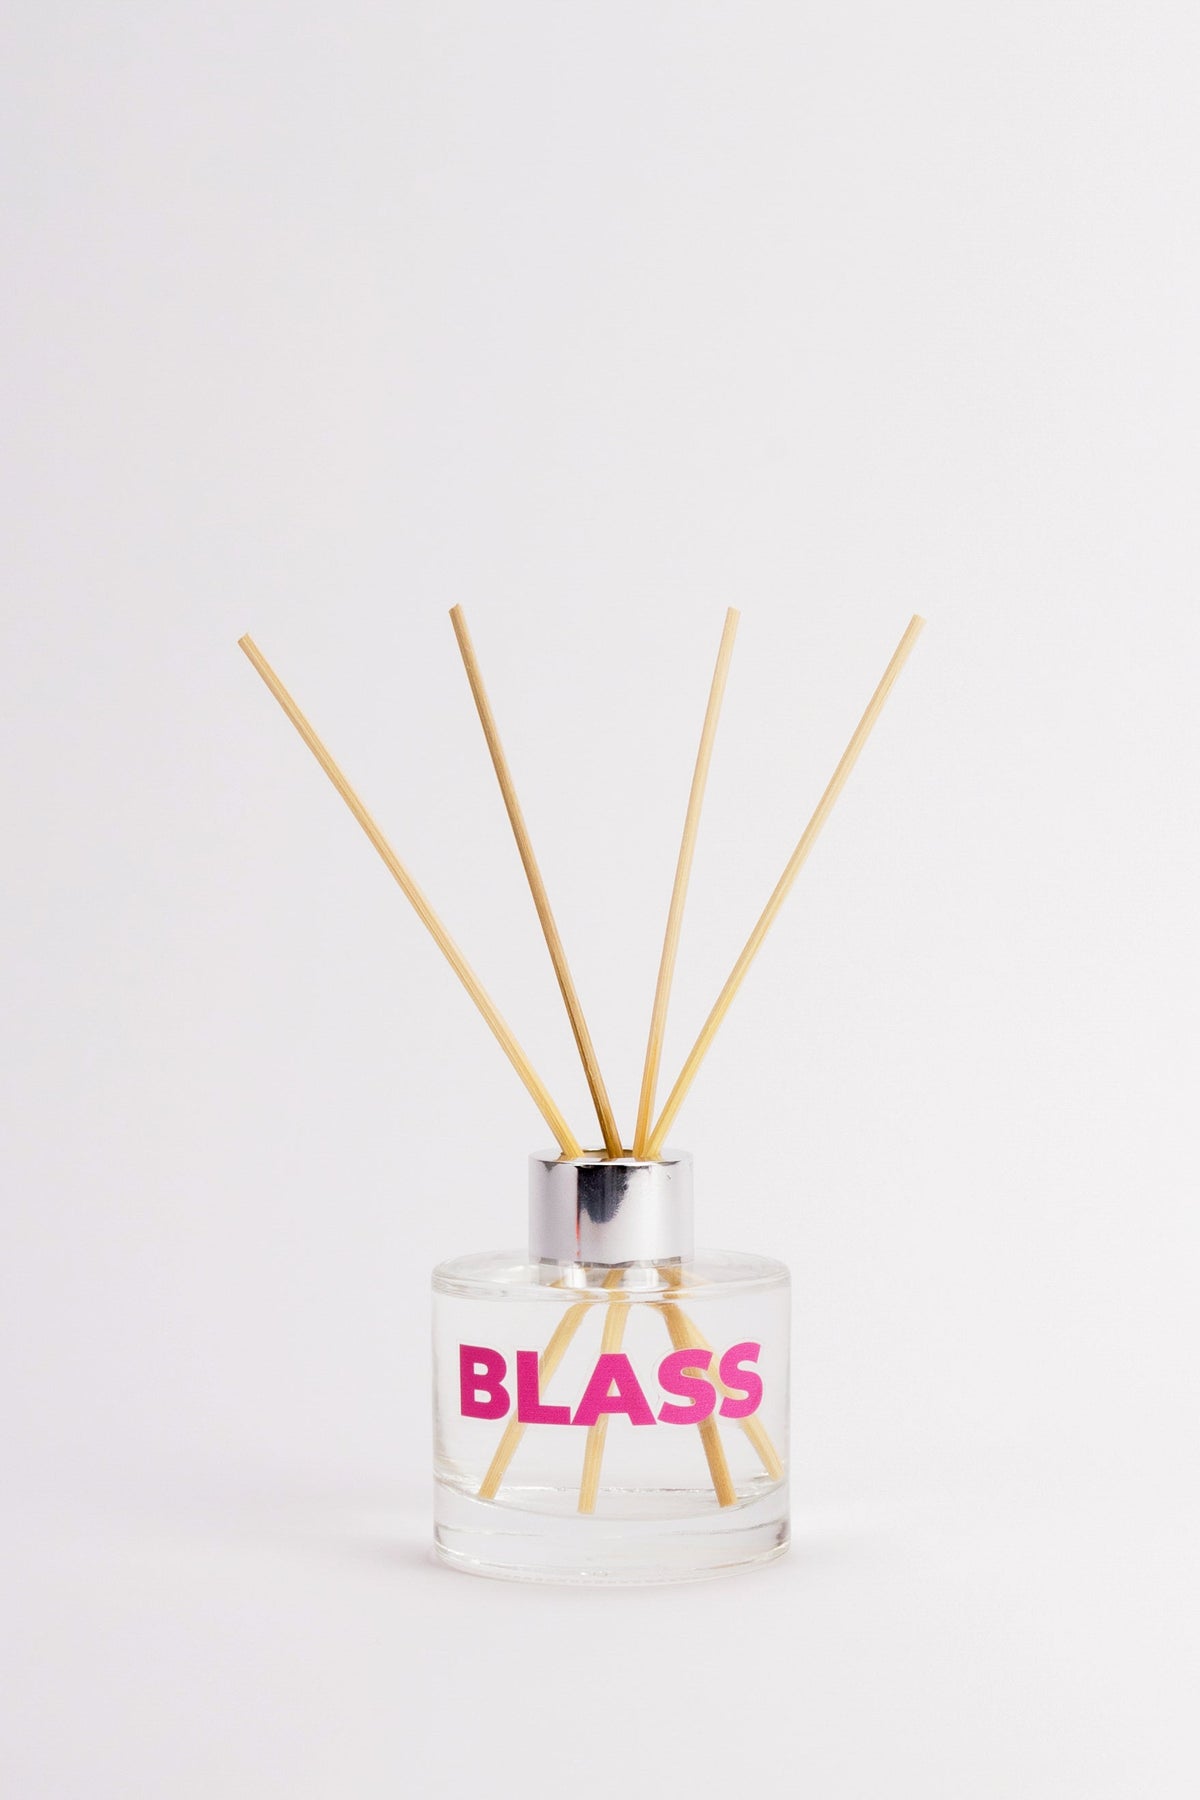 The Self-Care Reed Diffuser